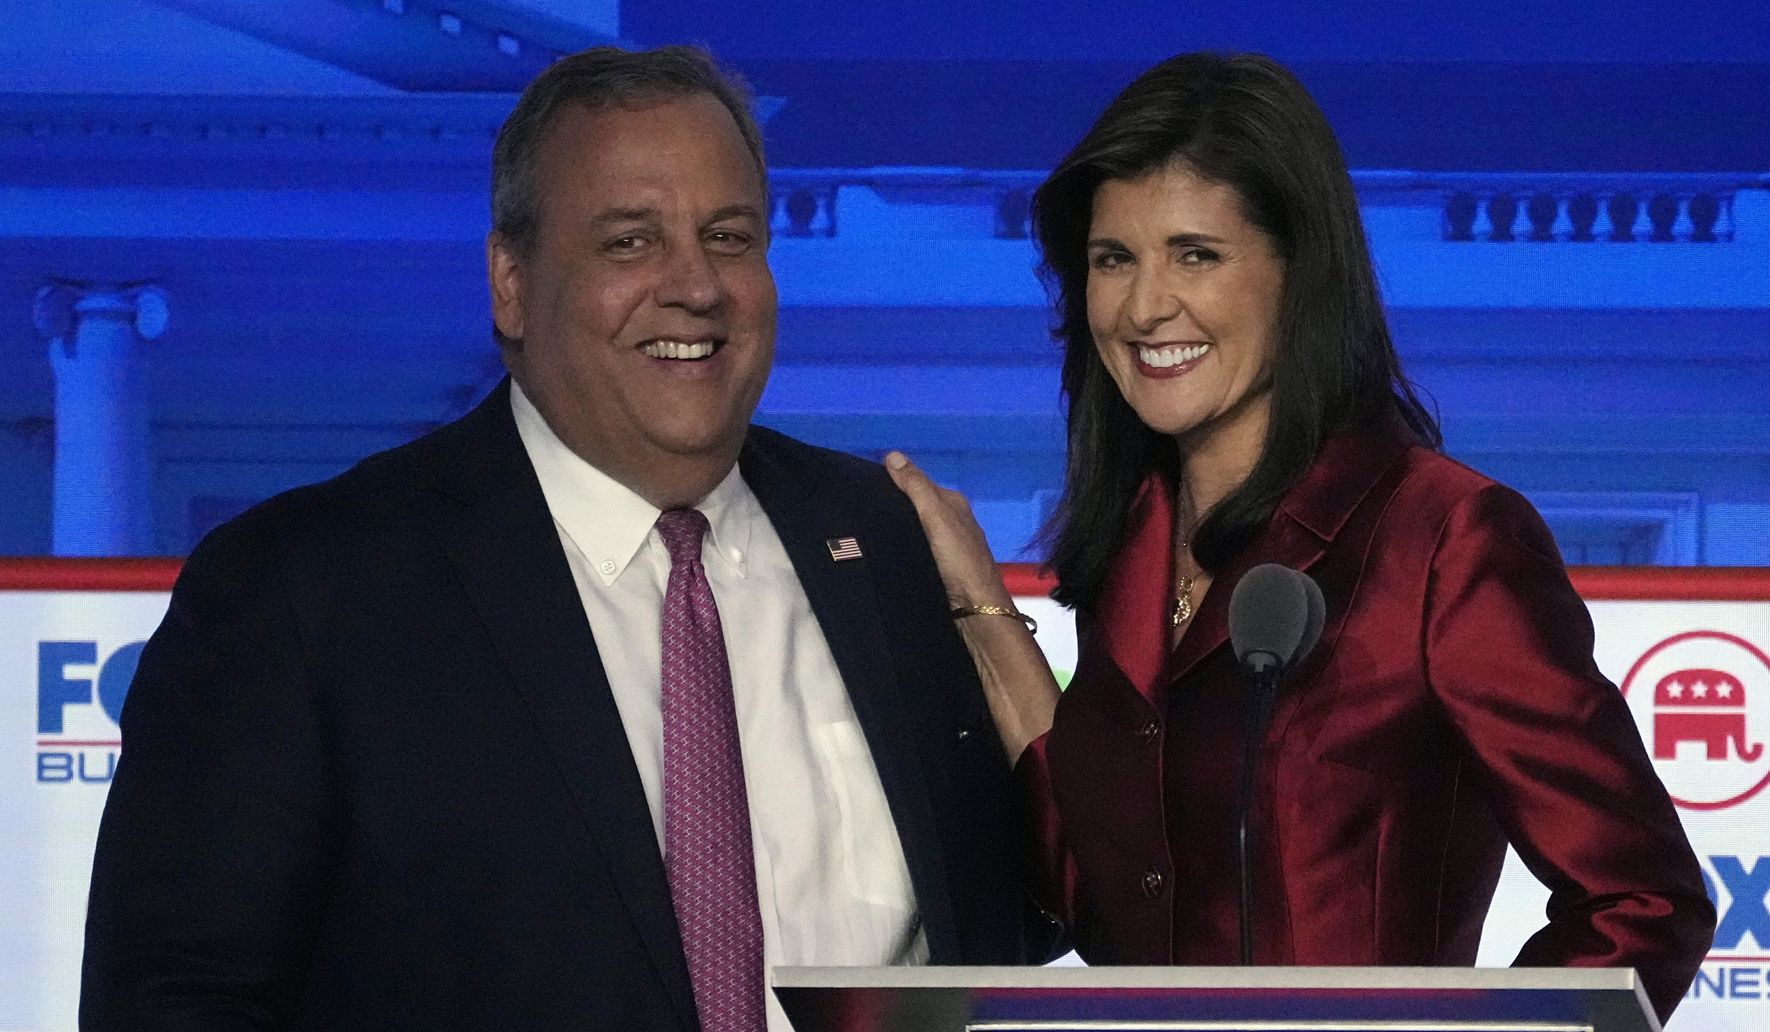 Chris Christie trashes idea of anti-Trump ticket with Nikki Haley: ‘Not the way voters vote'